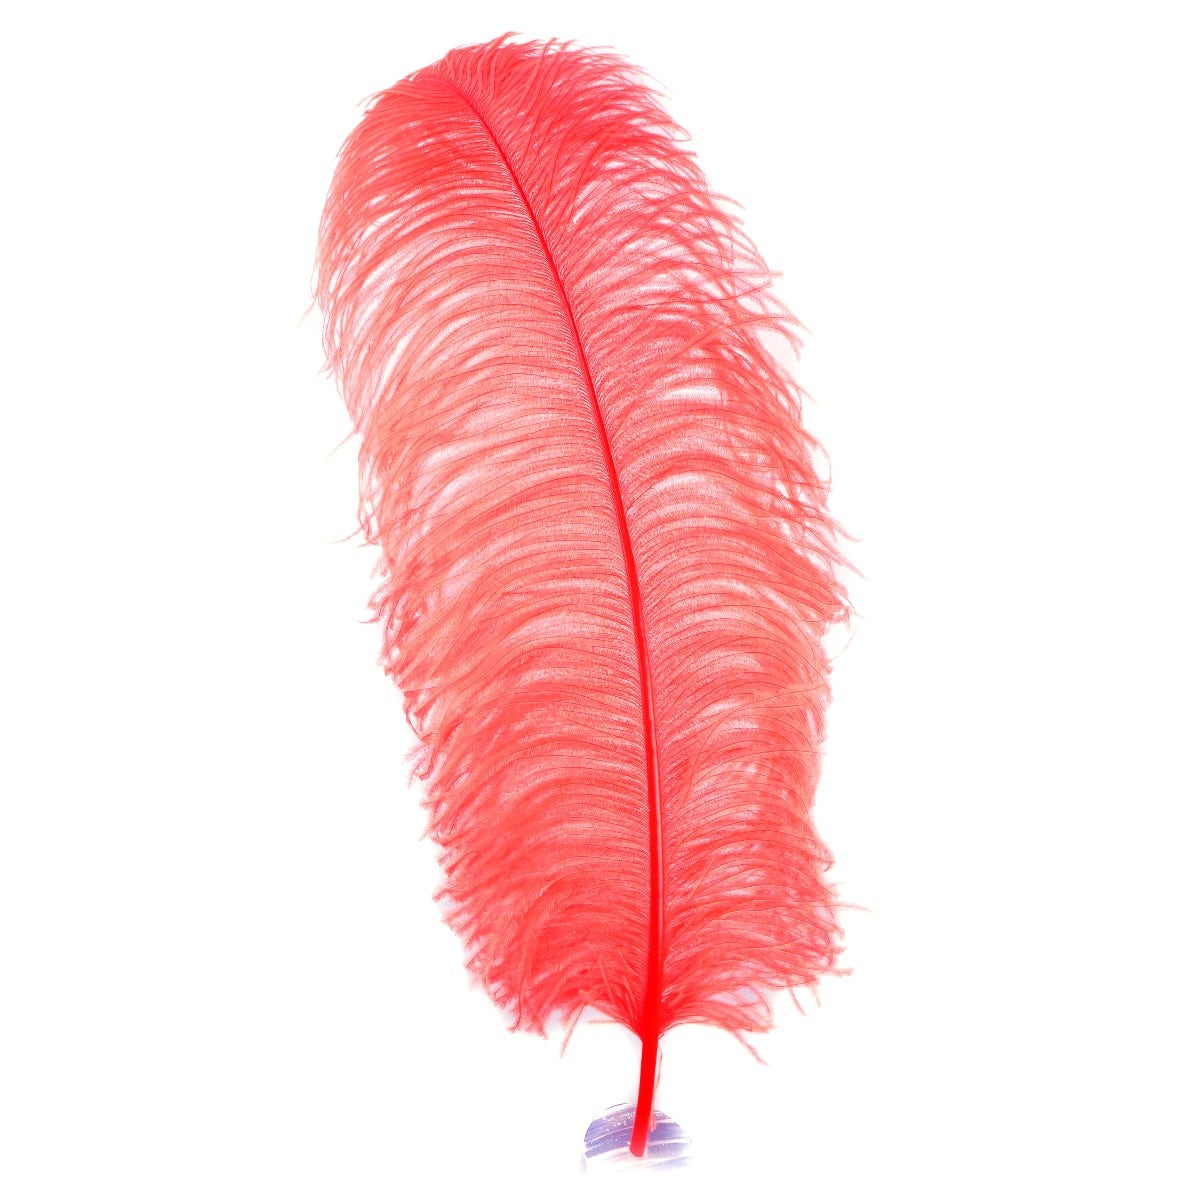 Large Ostrich Feathers - 20-25" Prime Femina Plumes - Coral